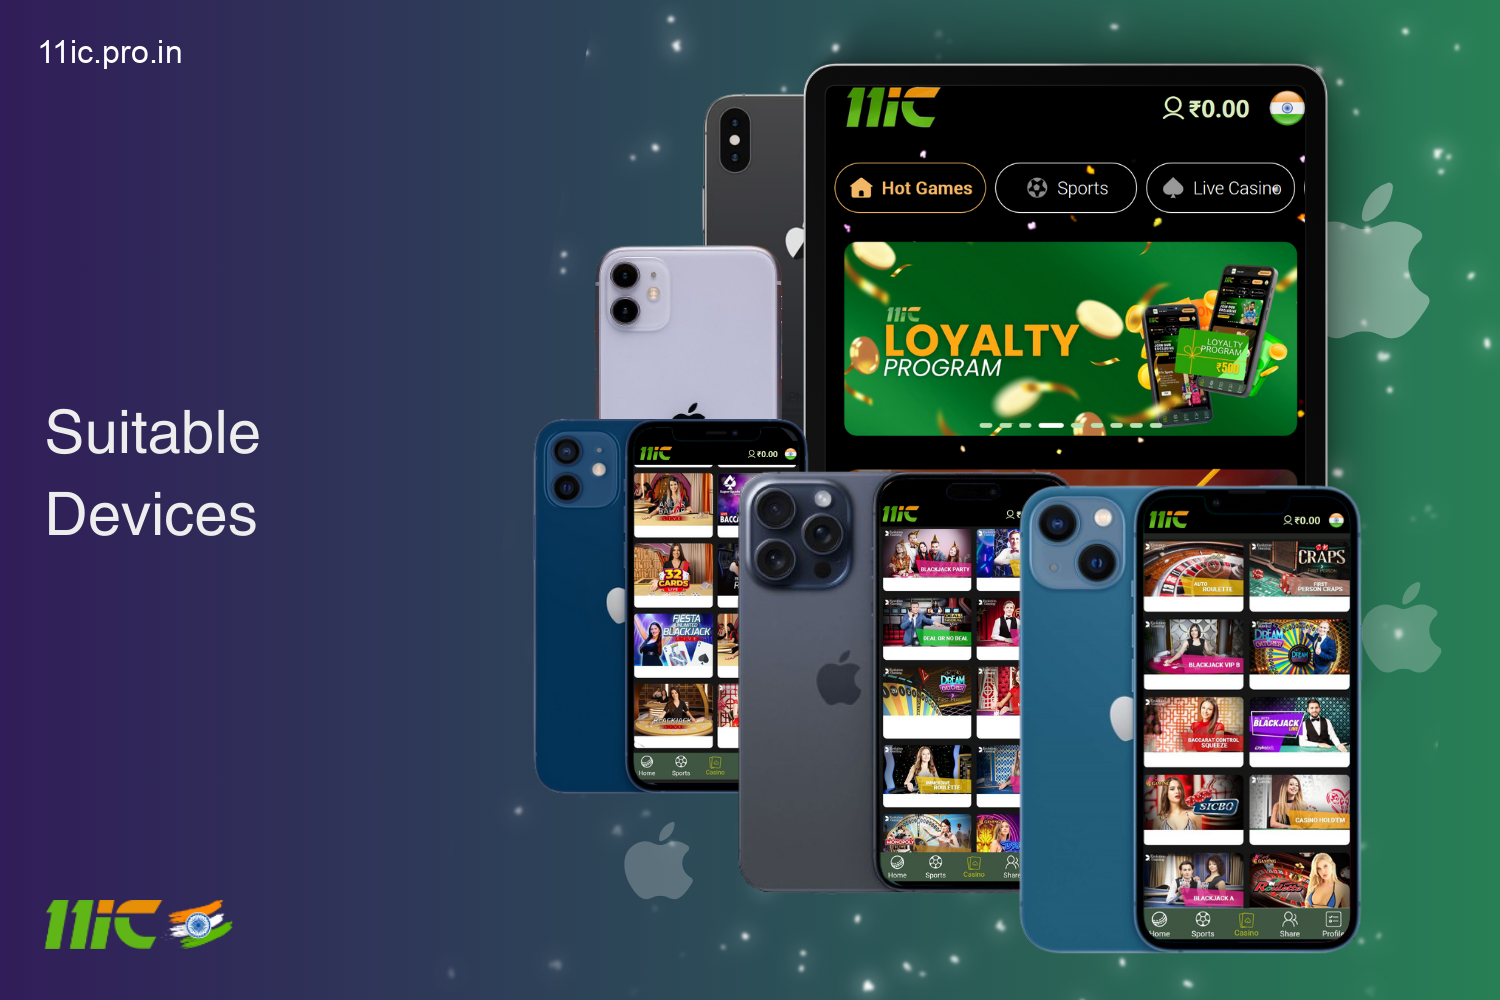 The 11ic app in India is compatible with devices on iOS 12.0 and above